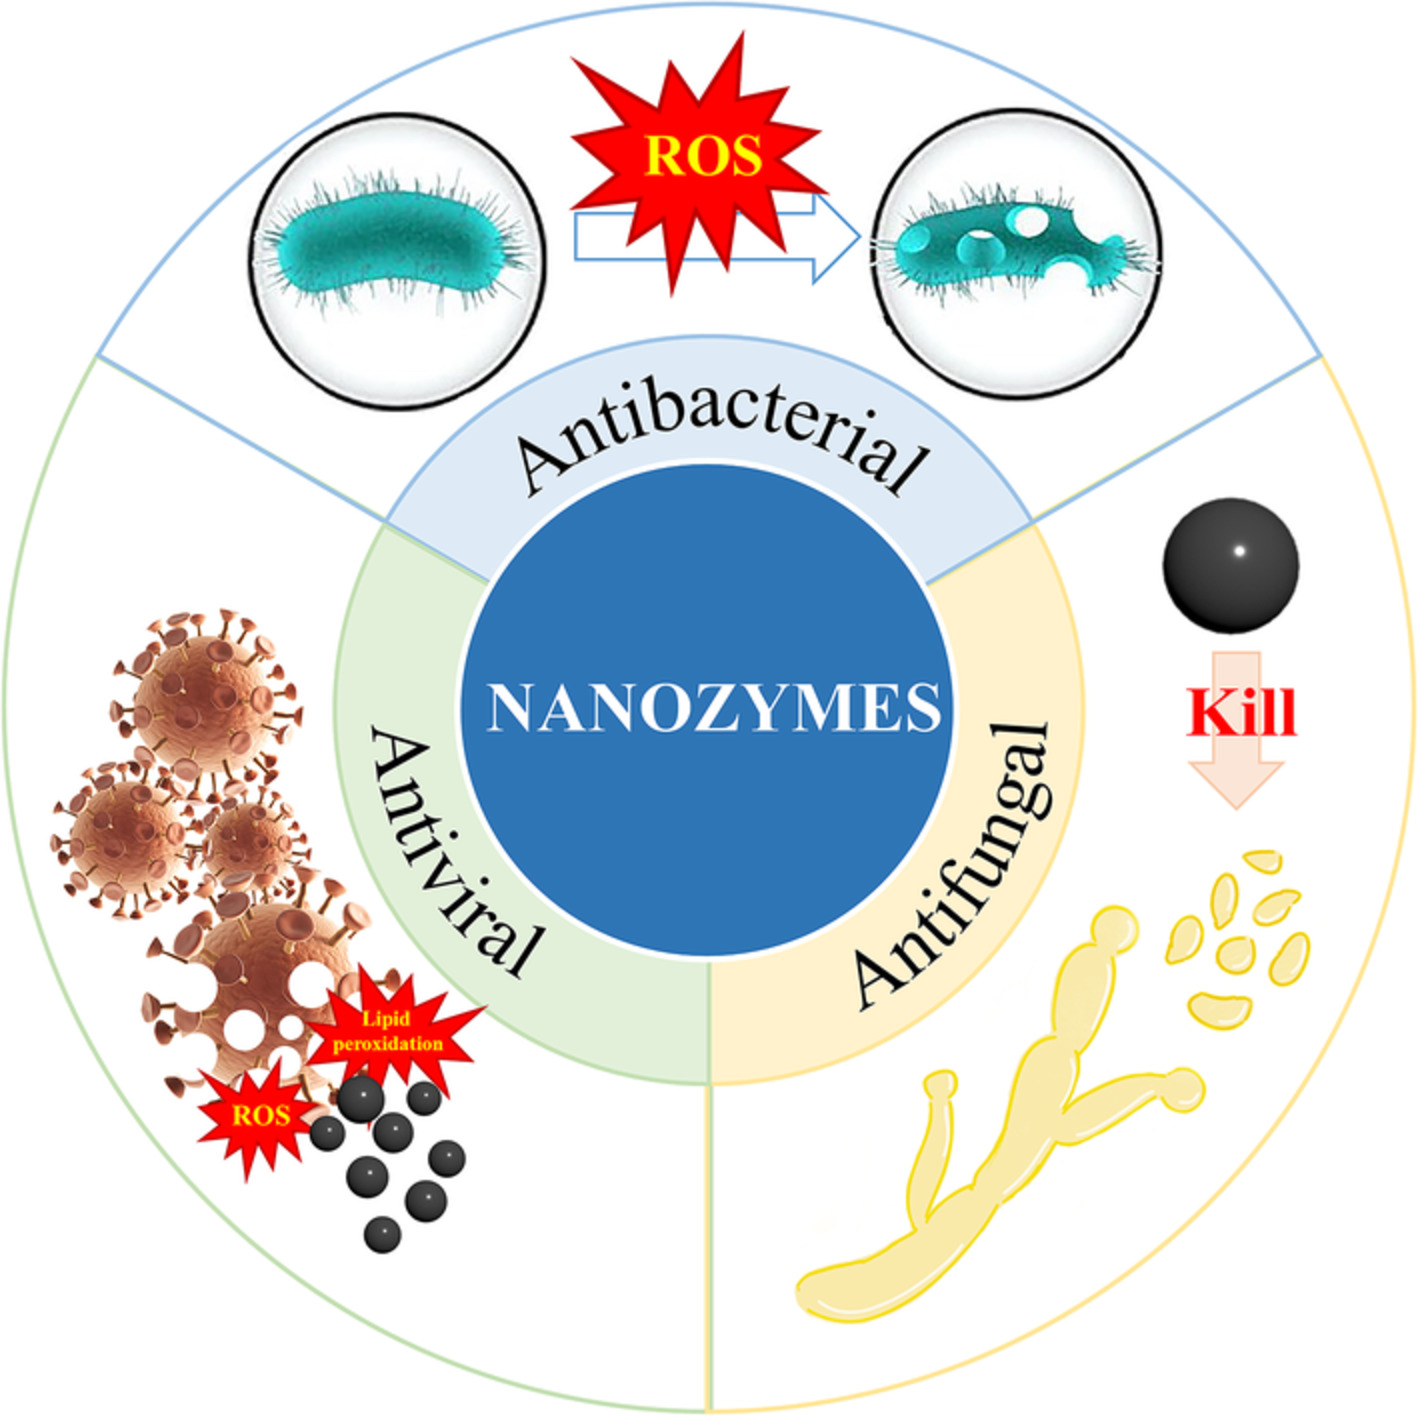 Catalytic antimicrobial therapy using nanozymes